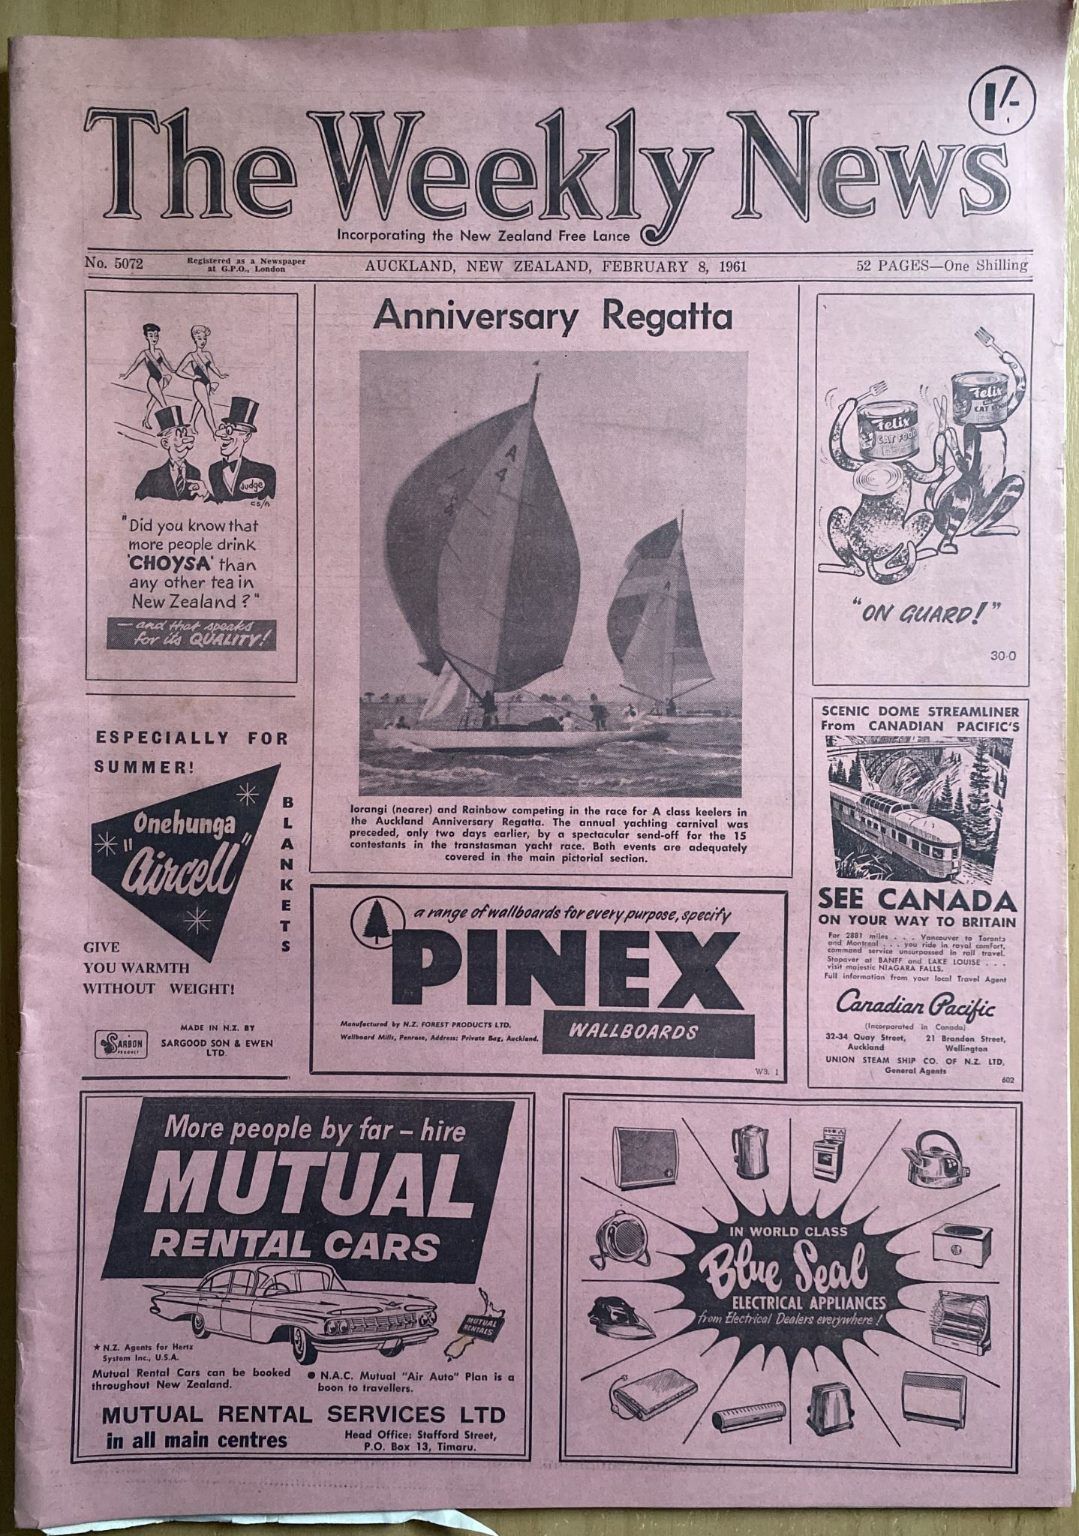 OLD NEWSPAPER: The Weekly News, No. 5072, 8 February 1961